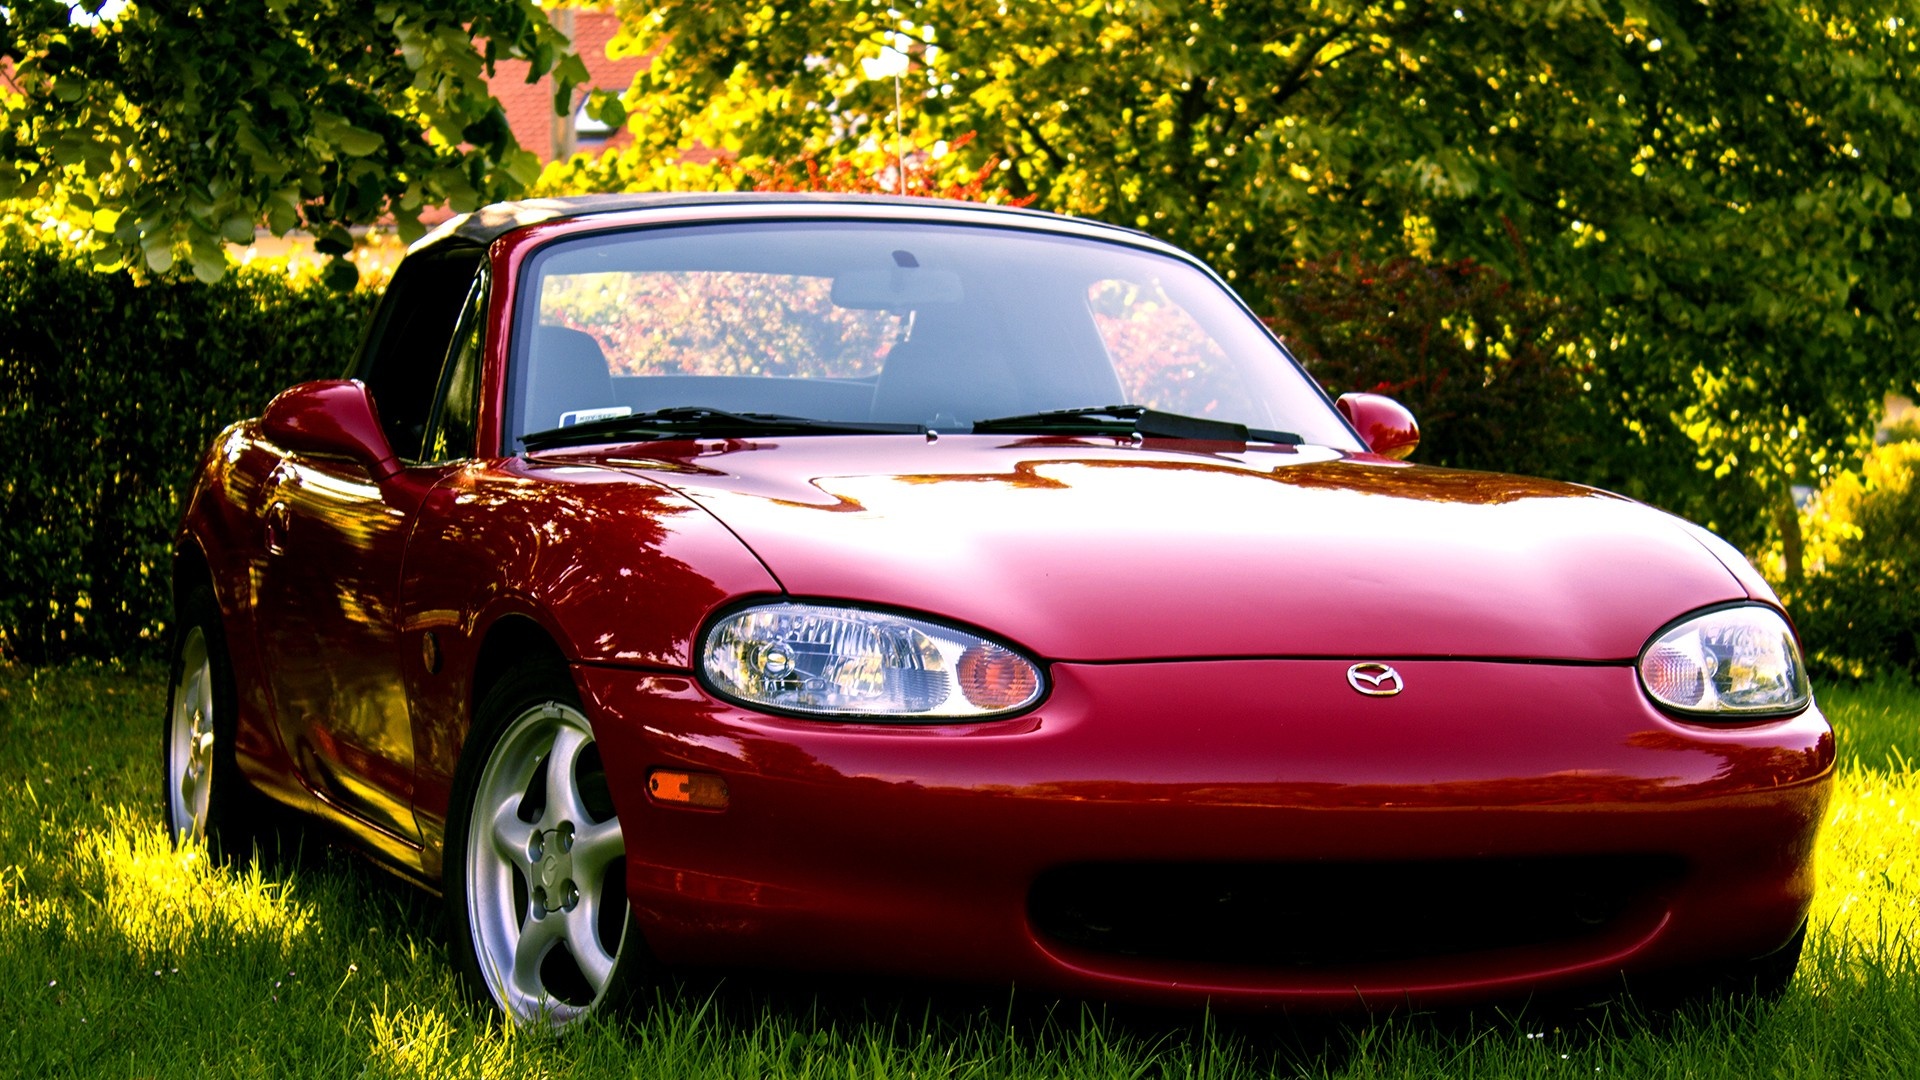 MX5 Mazda with grass, Nature-themed background, 1920x1080 Full HD Desktop